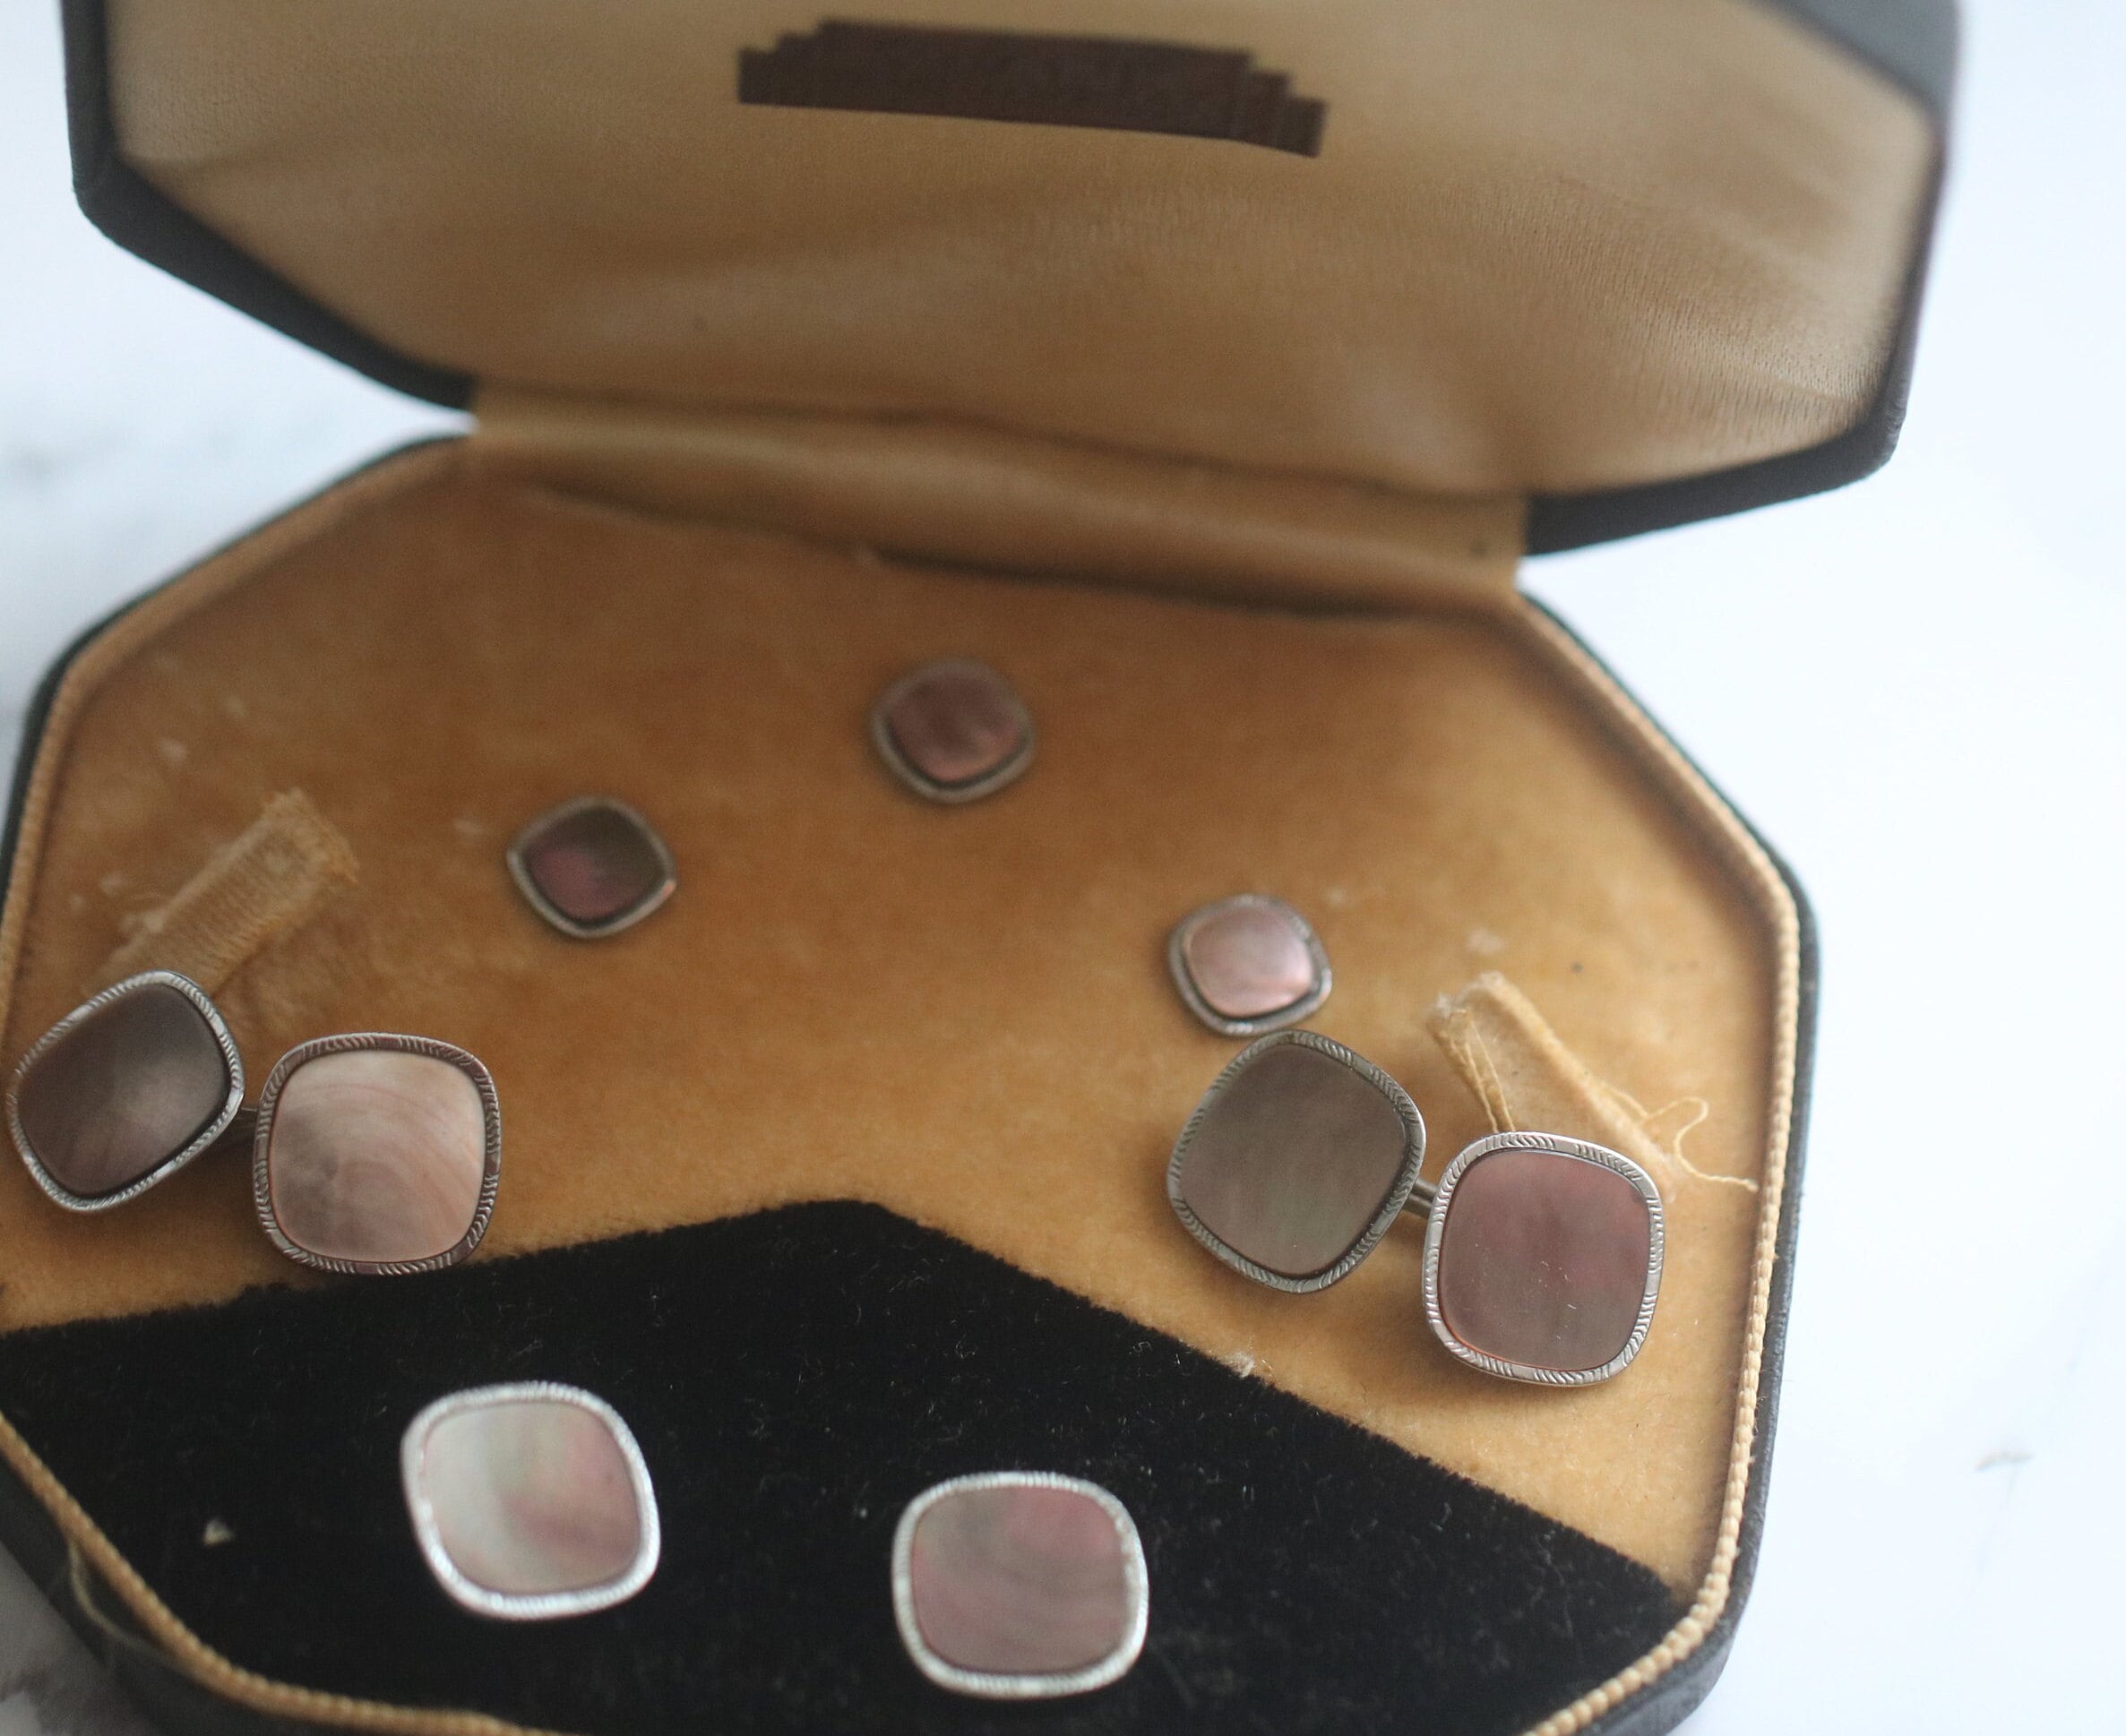 Vintage Square Mother of Pearl Cuff Links and Tuxedo Studs